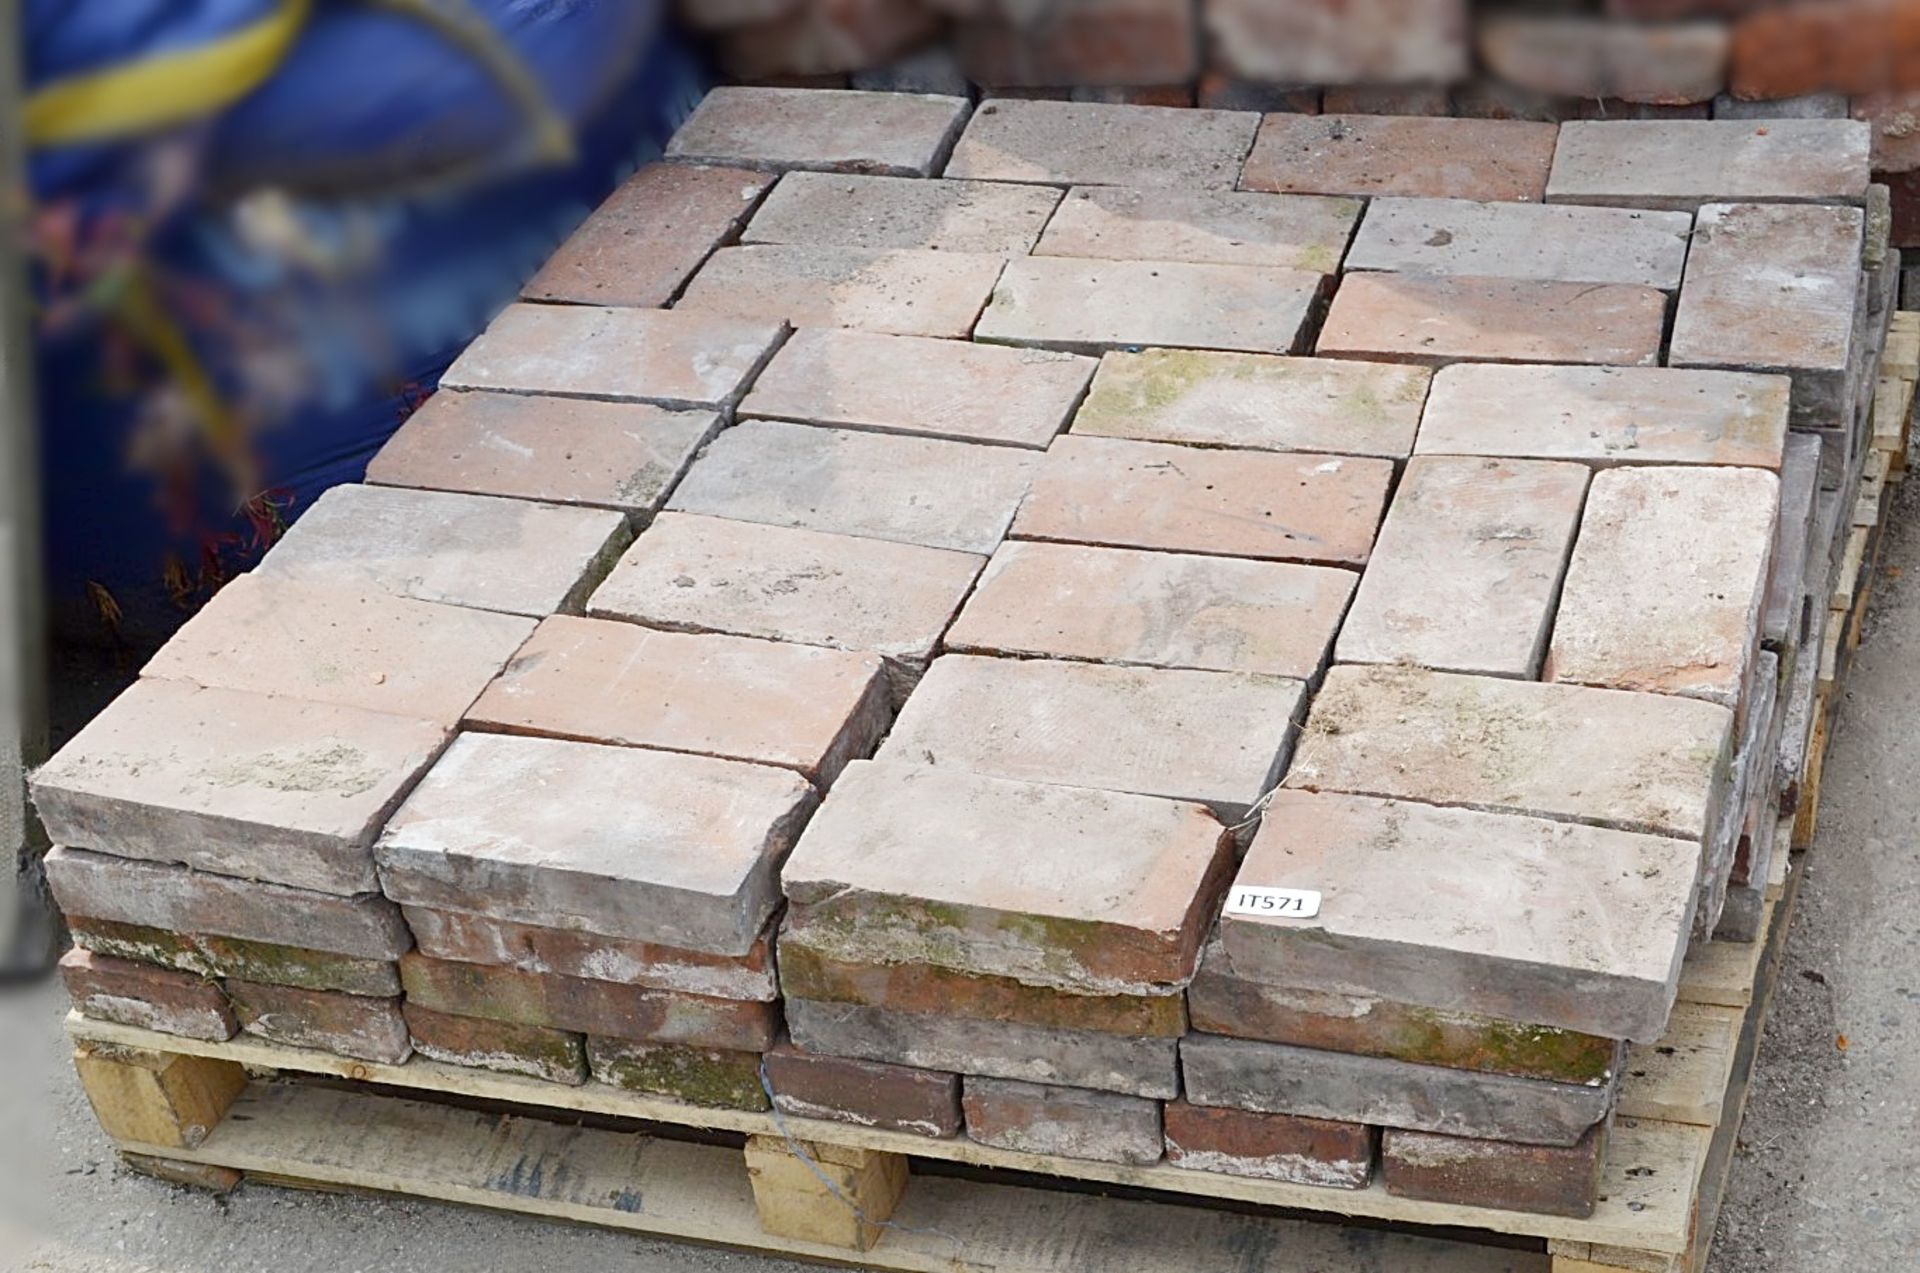 1 x Pallet Of Reclaimed Bricks - Approx 120 In Total - Dimensions: 25 x 12 x 5 - Ref: IT571 -